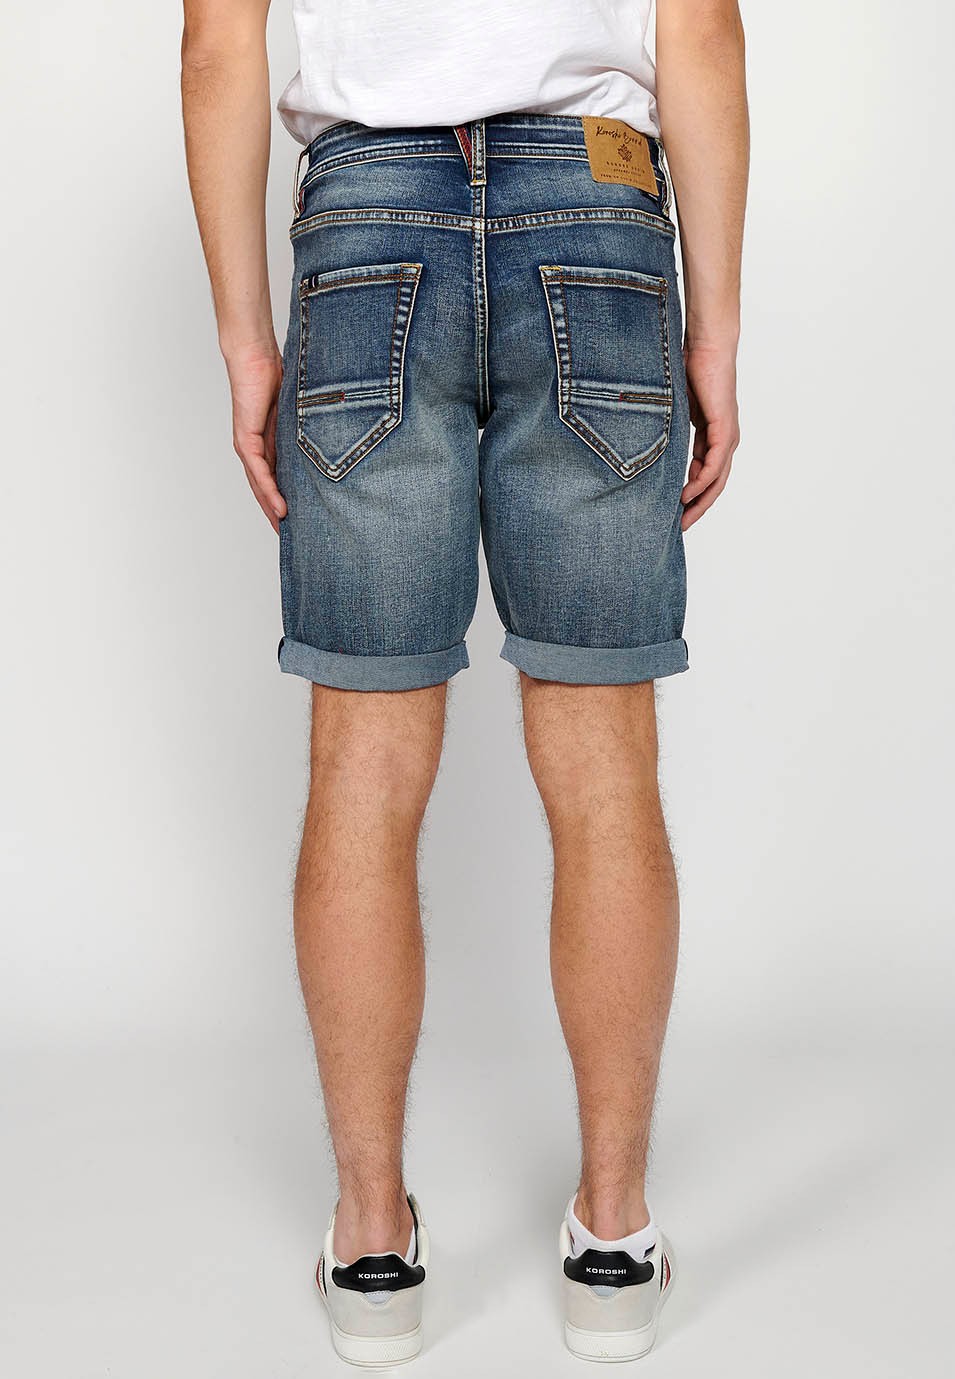 Denim Bermuda Shorts with Front Closure with Zipper and Button with Five Pockets, One Pocket Pocket, Blue Color for Men 3